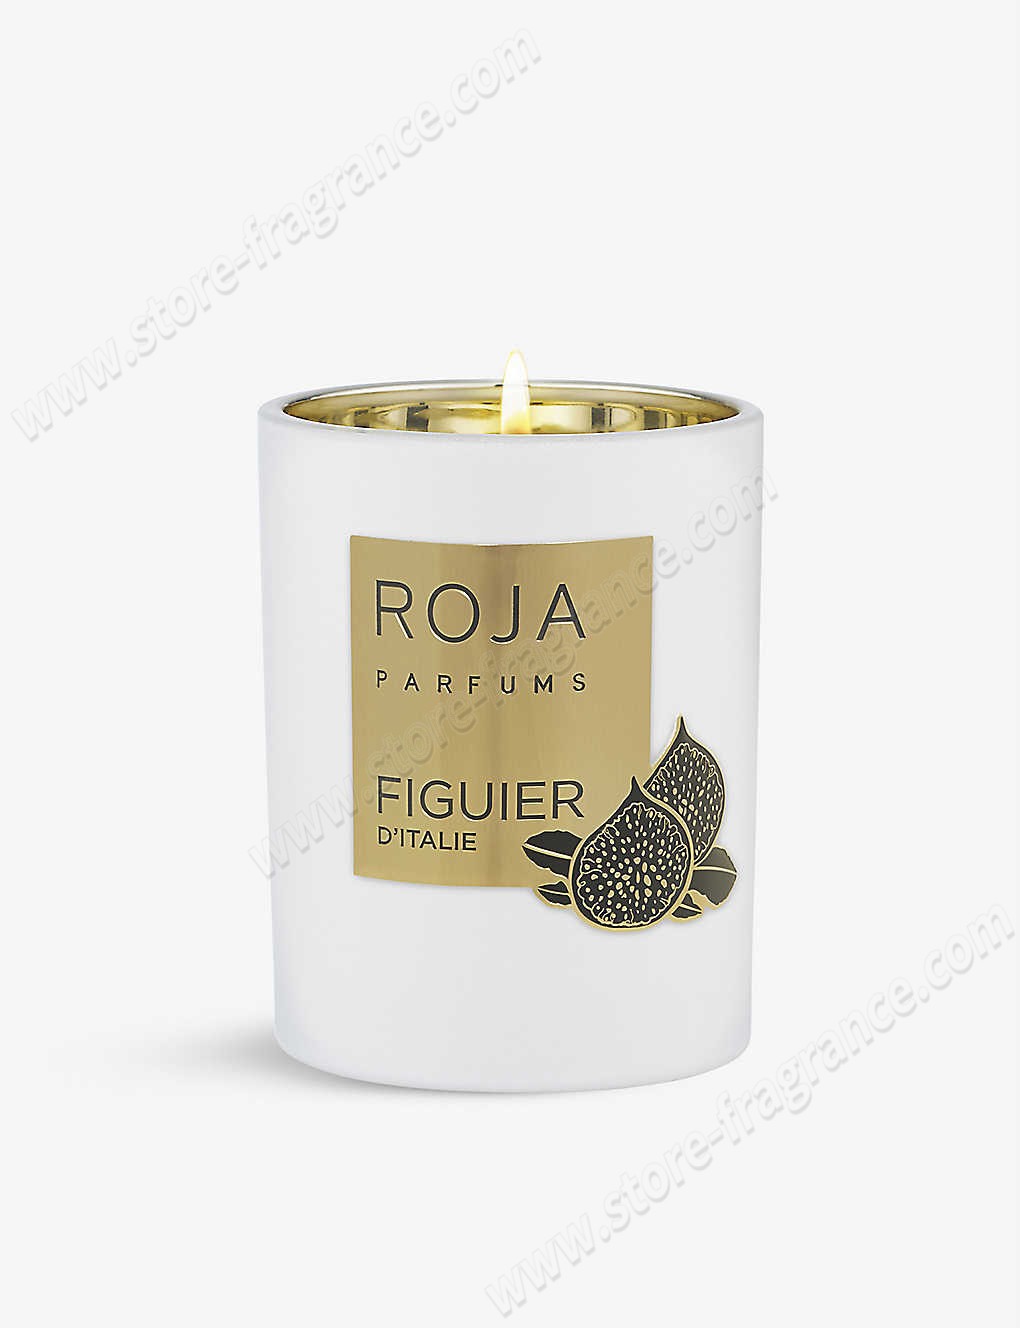 ROJA PARFUMS/Figuier d’Italie scented candle 300g ✿ Discount Store - ROJA PARFUMS/Figuier d’Italie scented candle 300g ✿ Discount Store